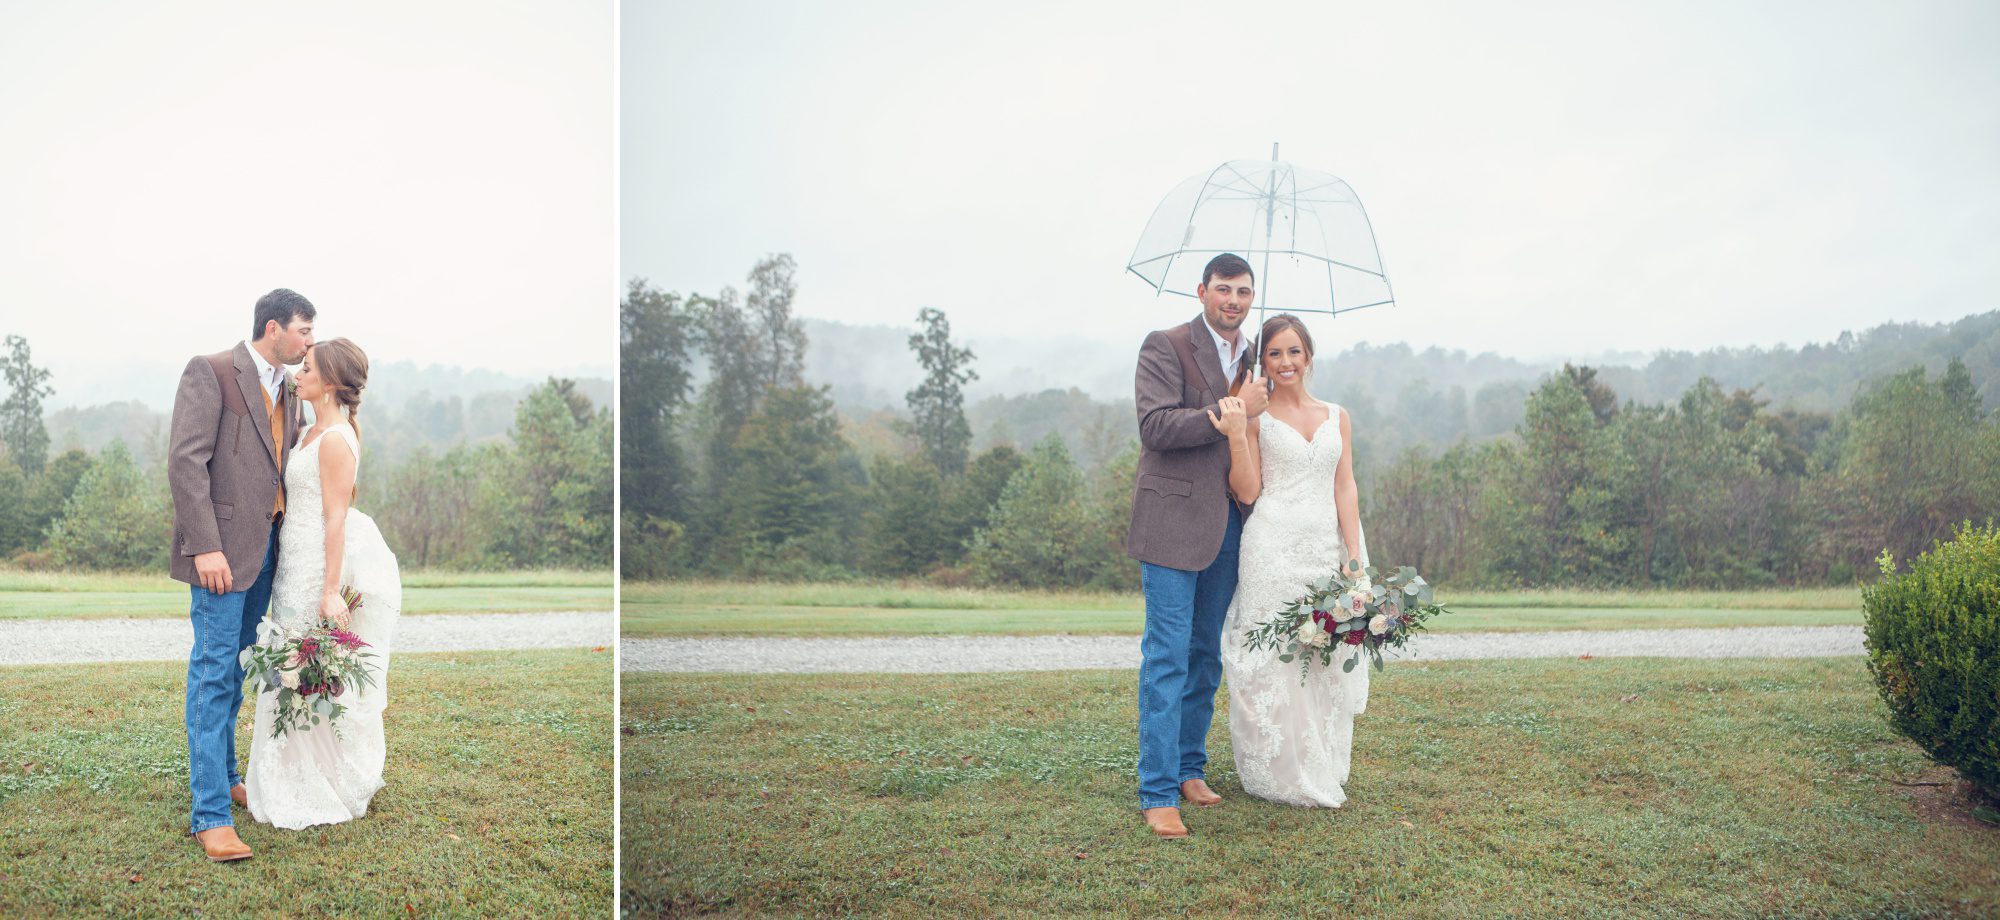 Bride and groom pose for rainy day photo in mist before wedding reception details before wedding ceremony photography at Front Porch Farms, Wedding photography by Krista Lee